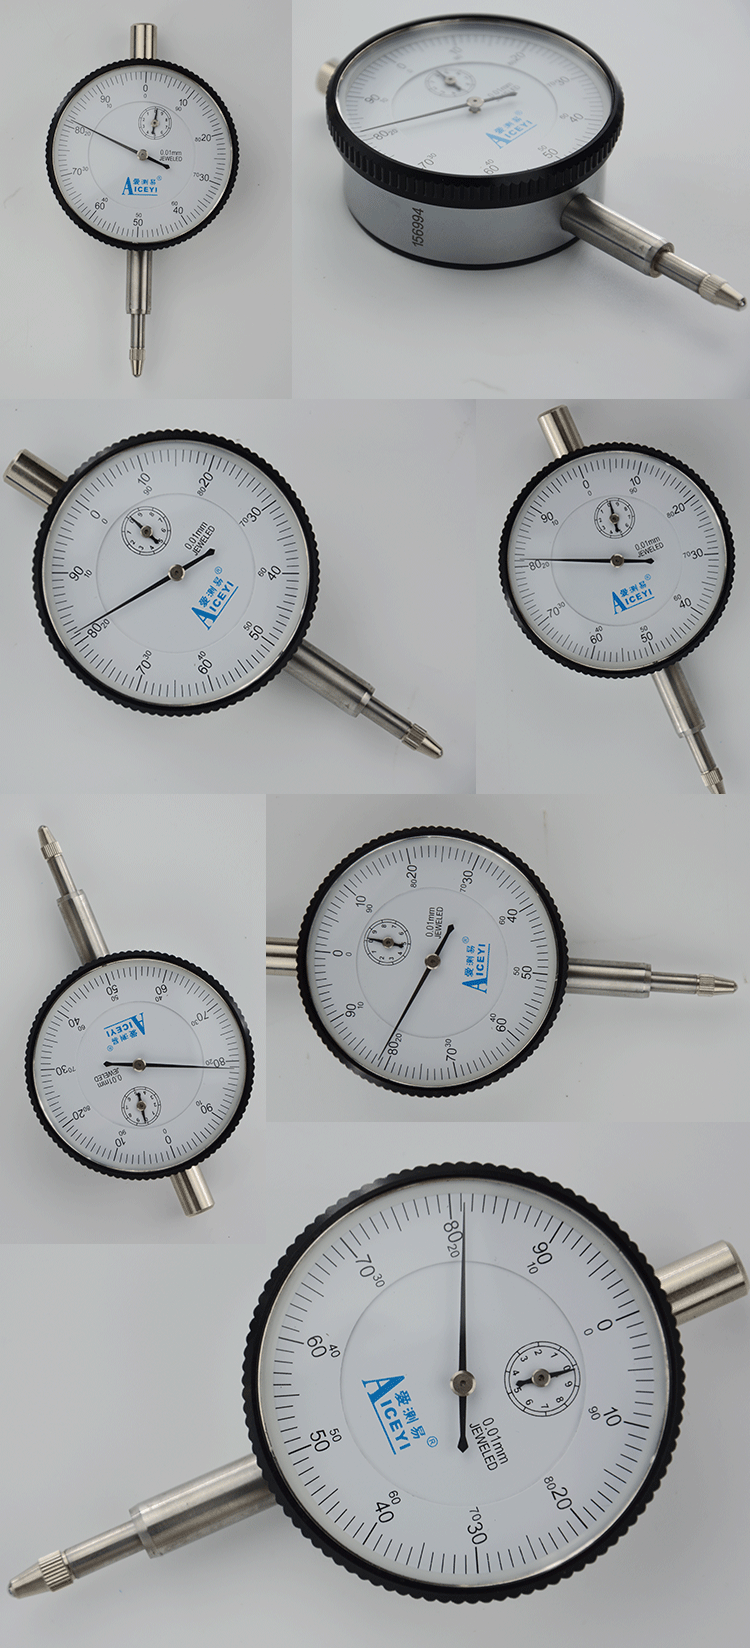 ACE 0-10mm 0.01mm Laboratory Dial Indicator dial gauge indicator